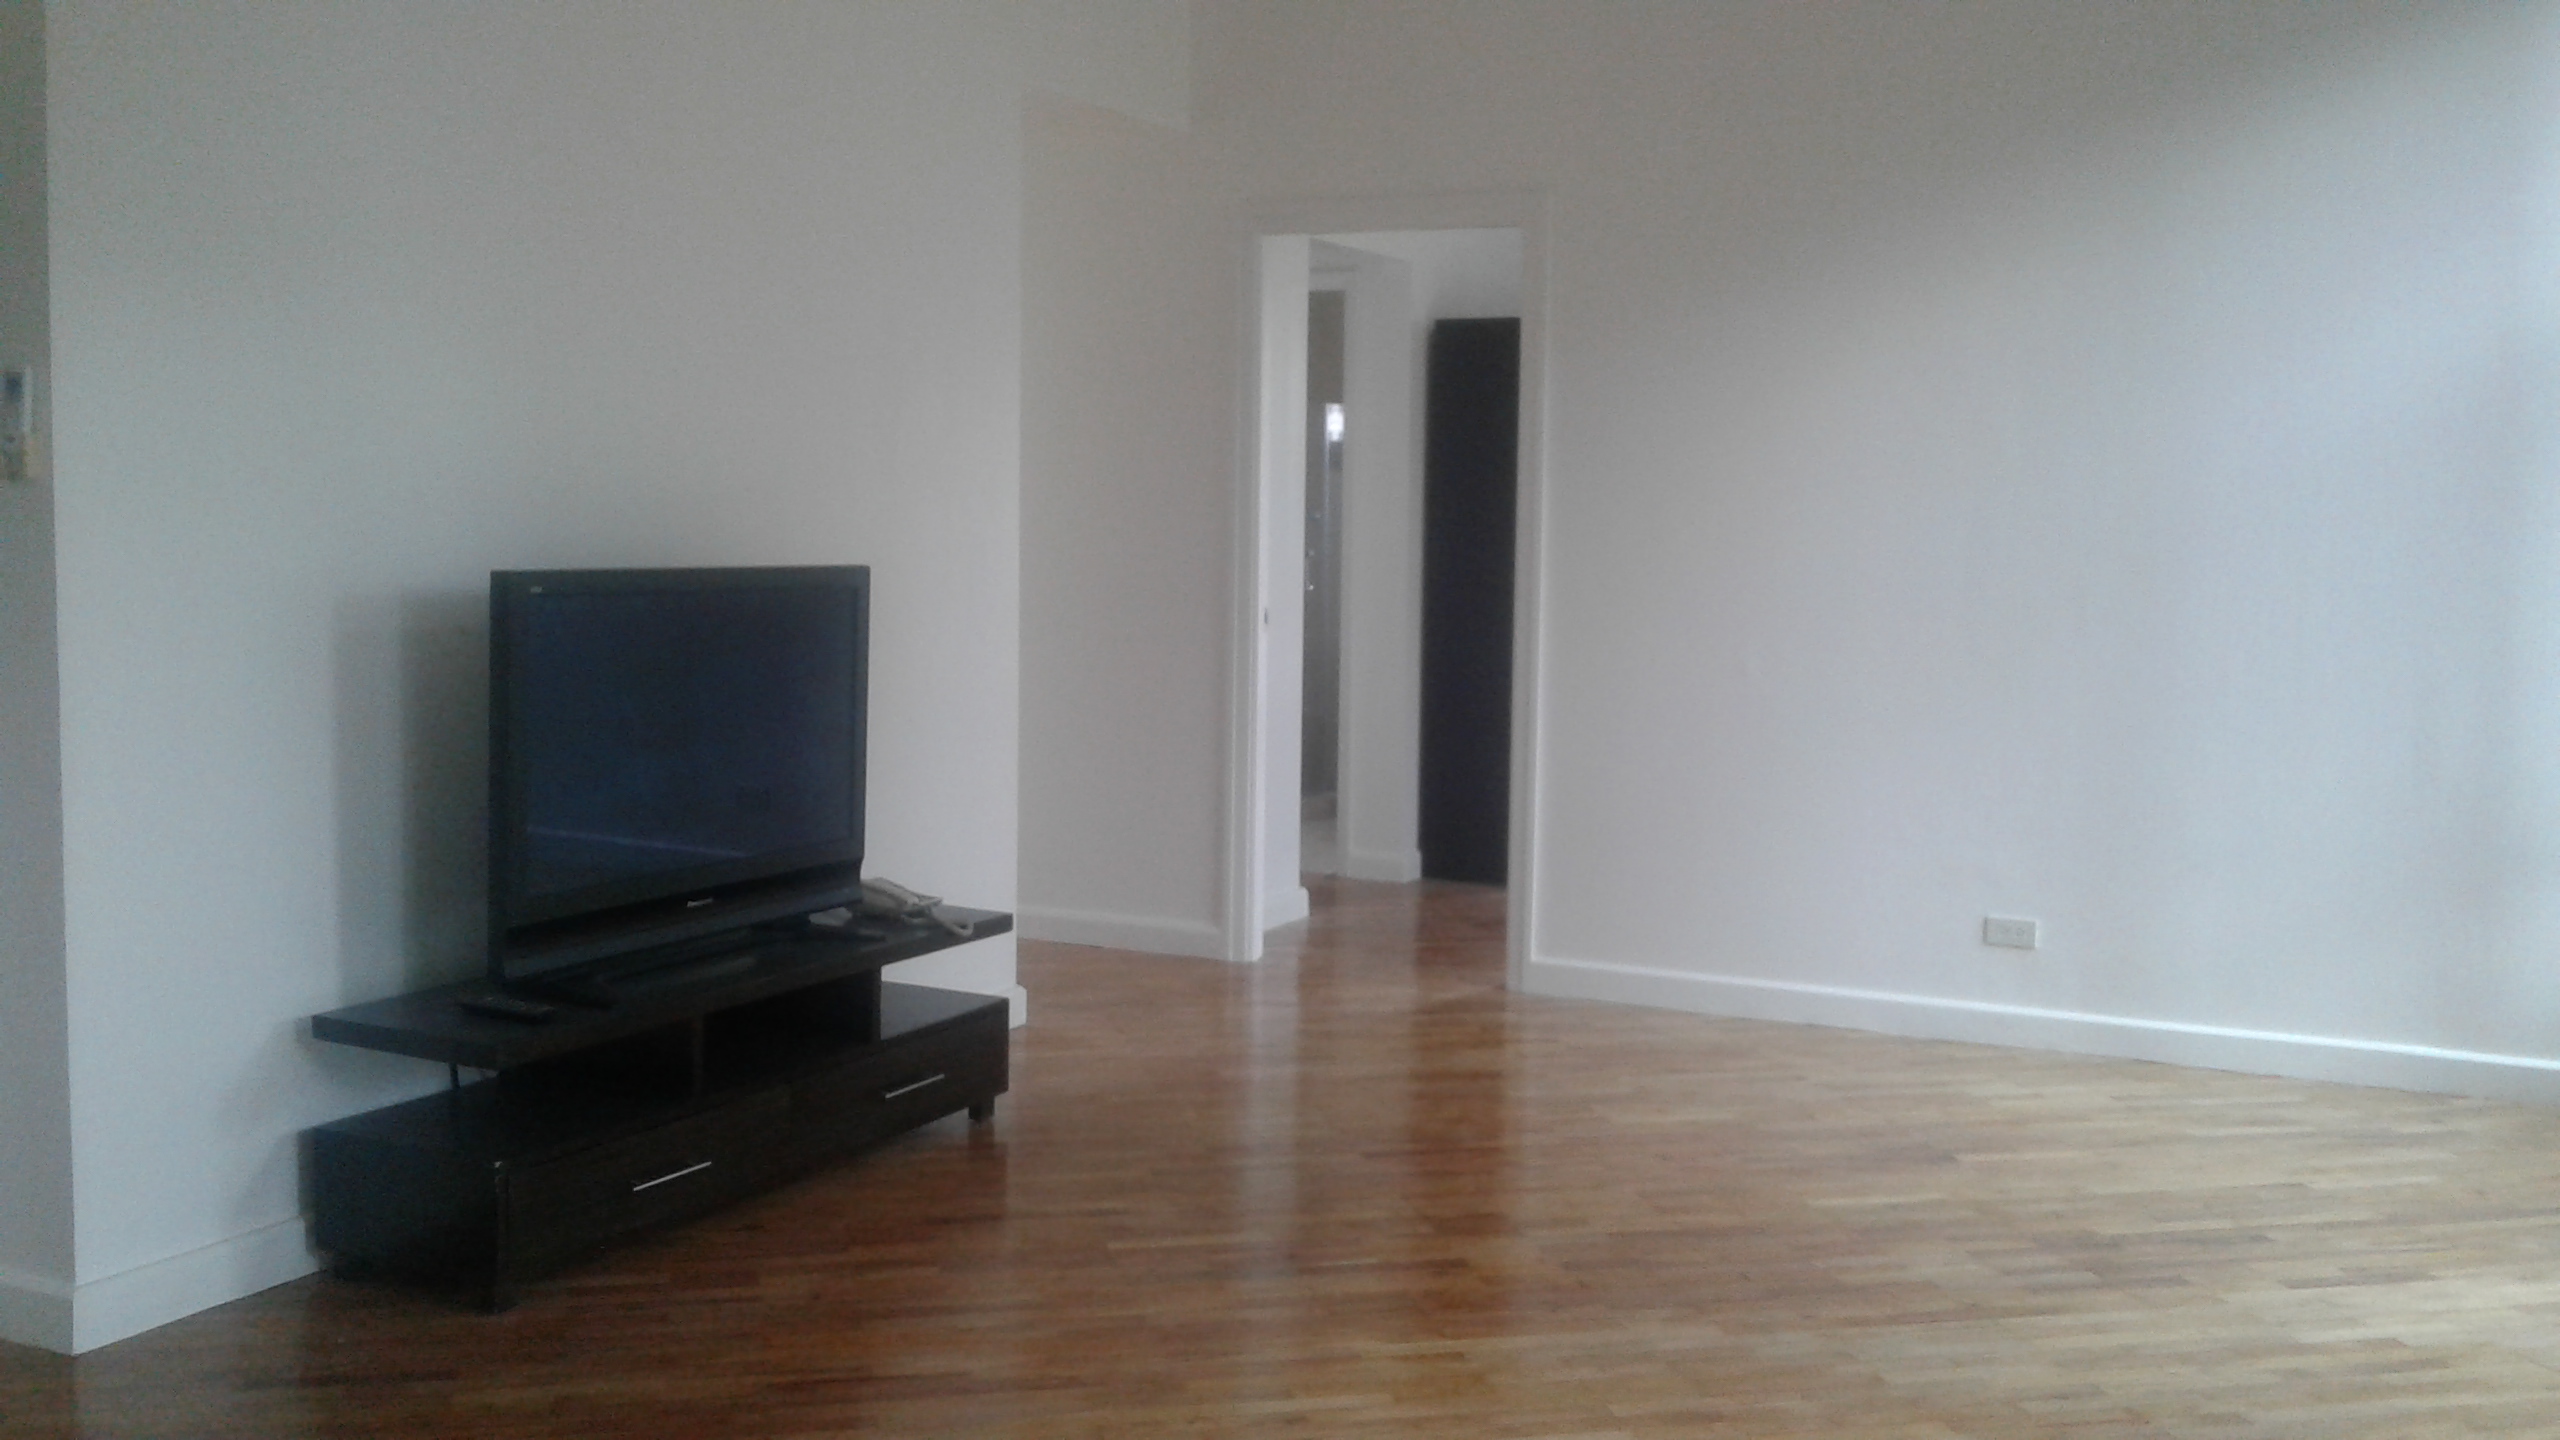 2BR for Rent in JOYA NORTH TOWER